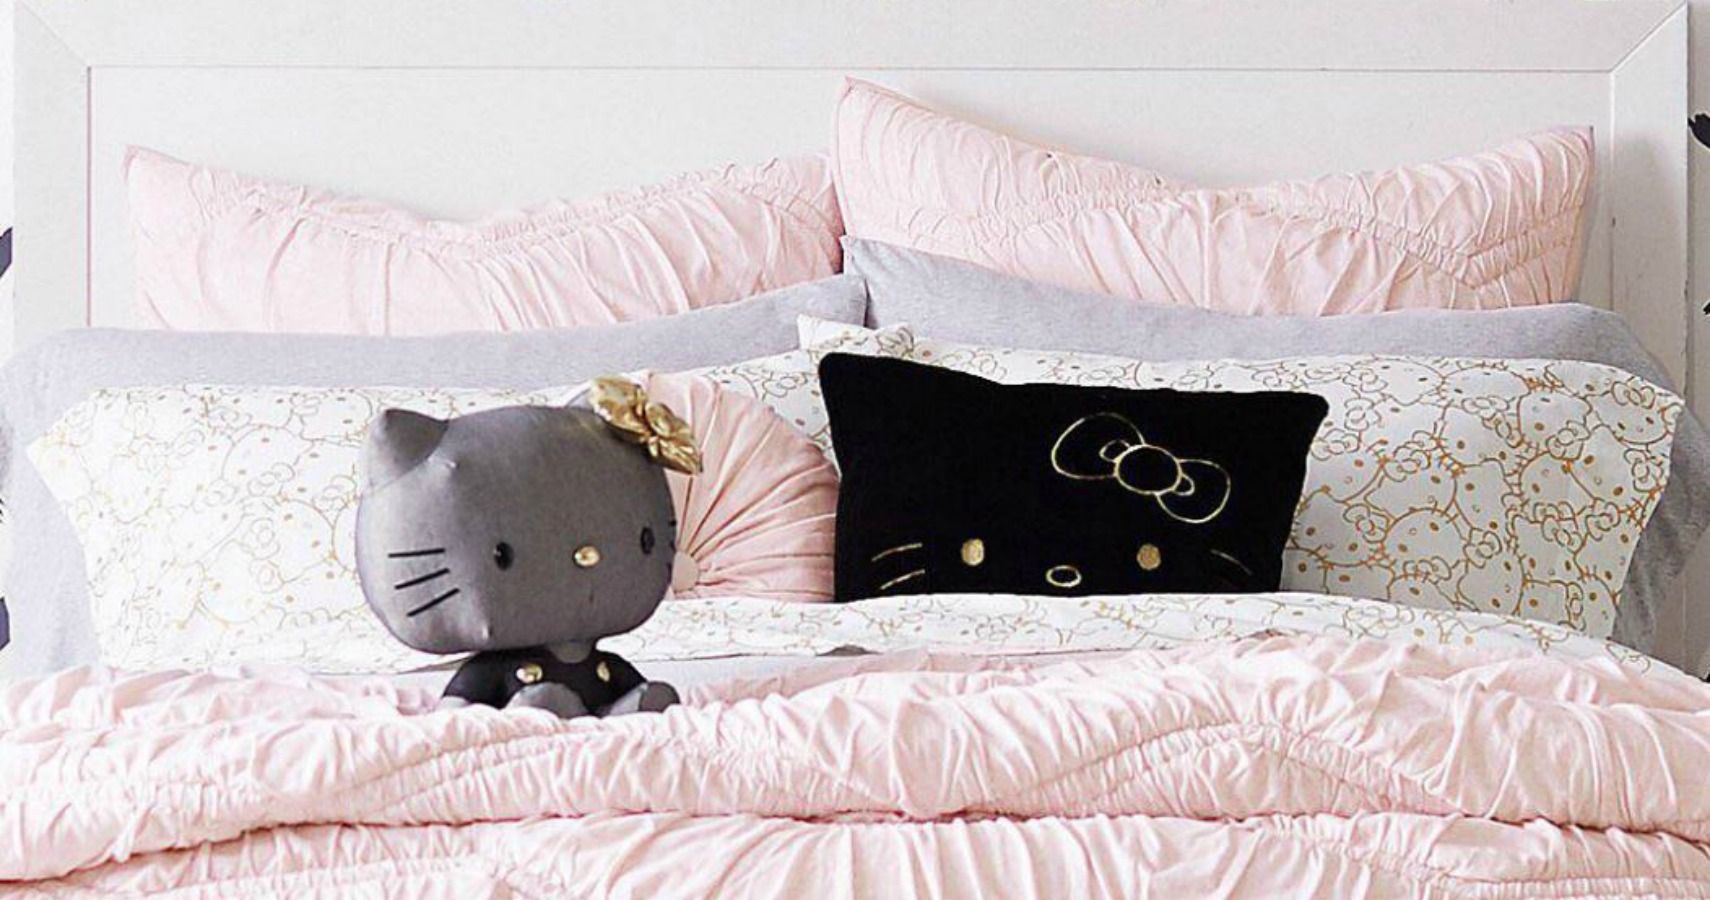 Pottery Barn S New Hello Kitty Collection Is The Cutest Thing Ever